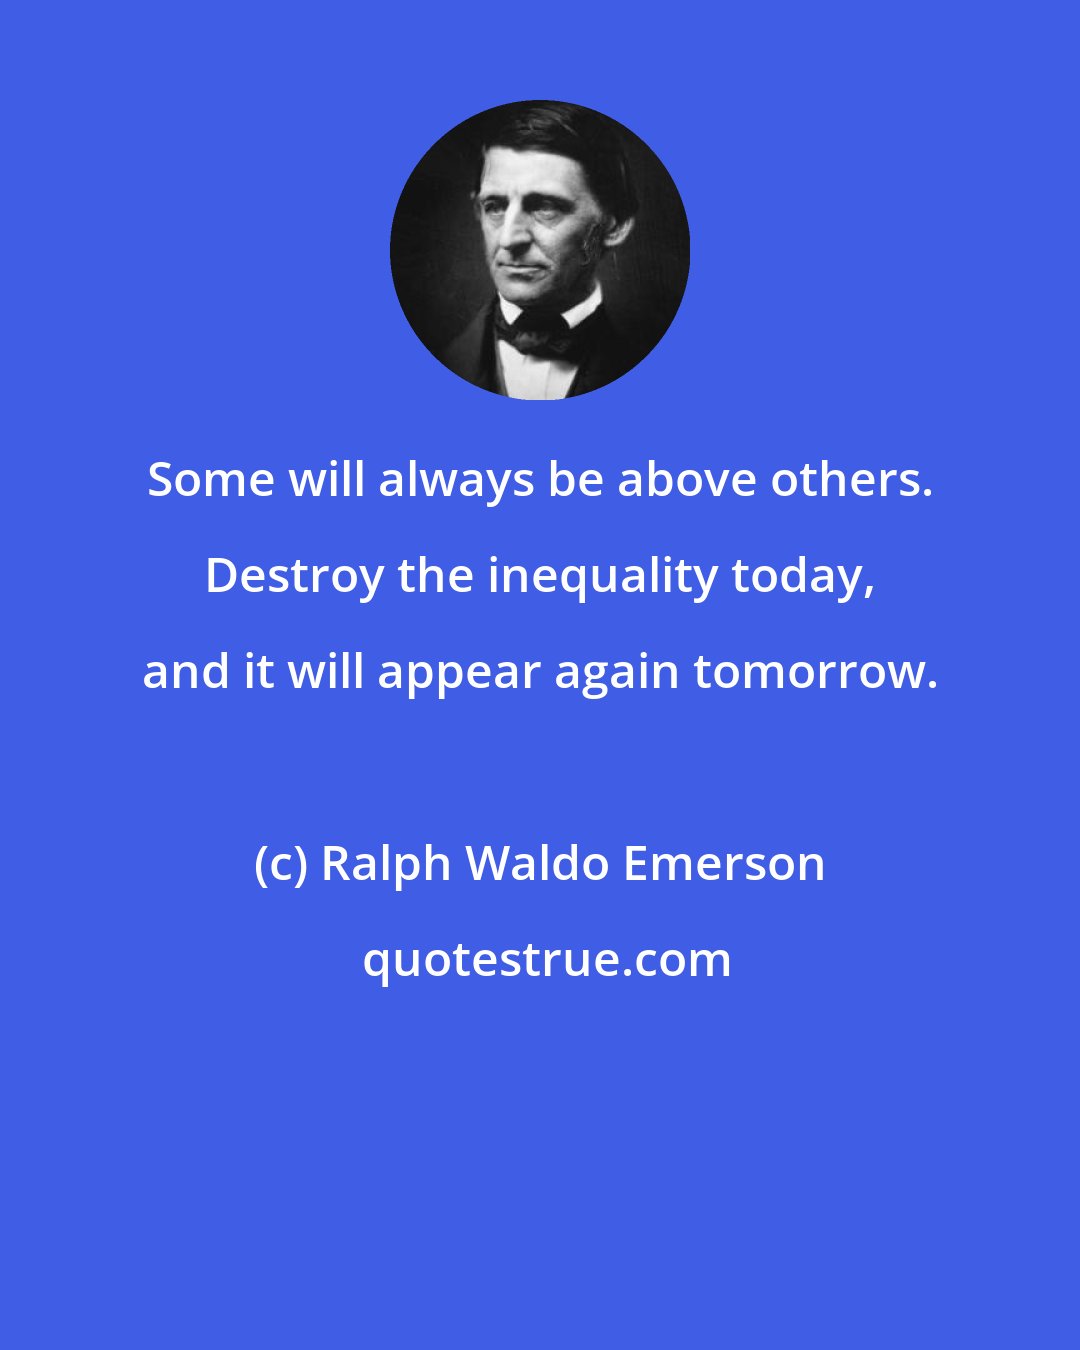 Ralph Waldo Emerson: Some will always be above others. Destroy the inequality today, and it will appear again tomorrow.